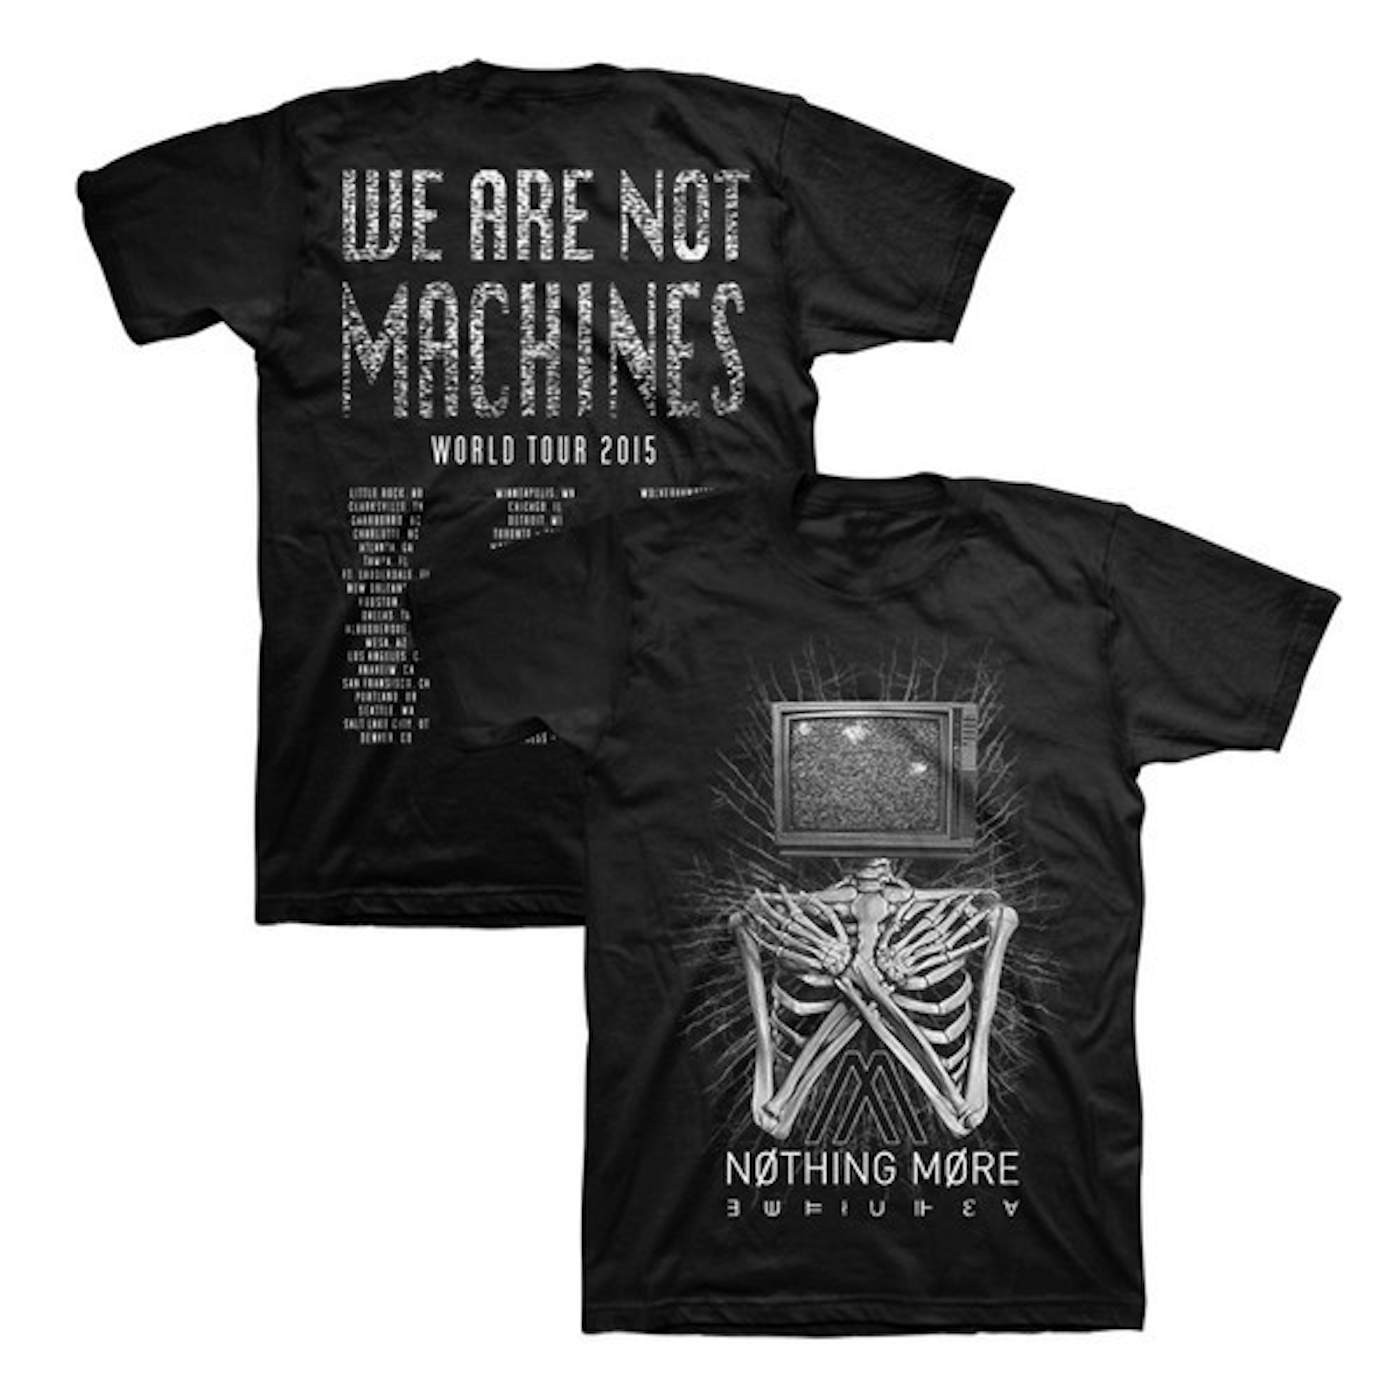 NOTHING MORE We Are Not Machines World Tour 2015 Unisex Tee